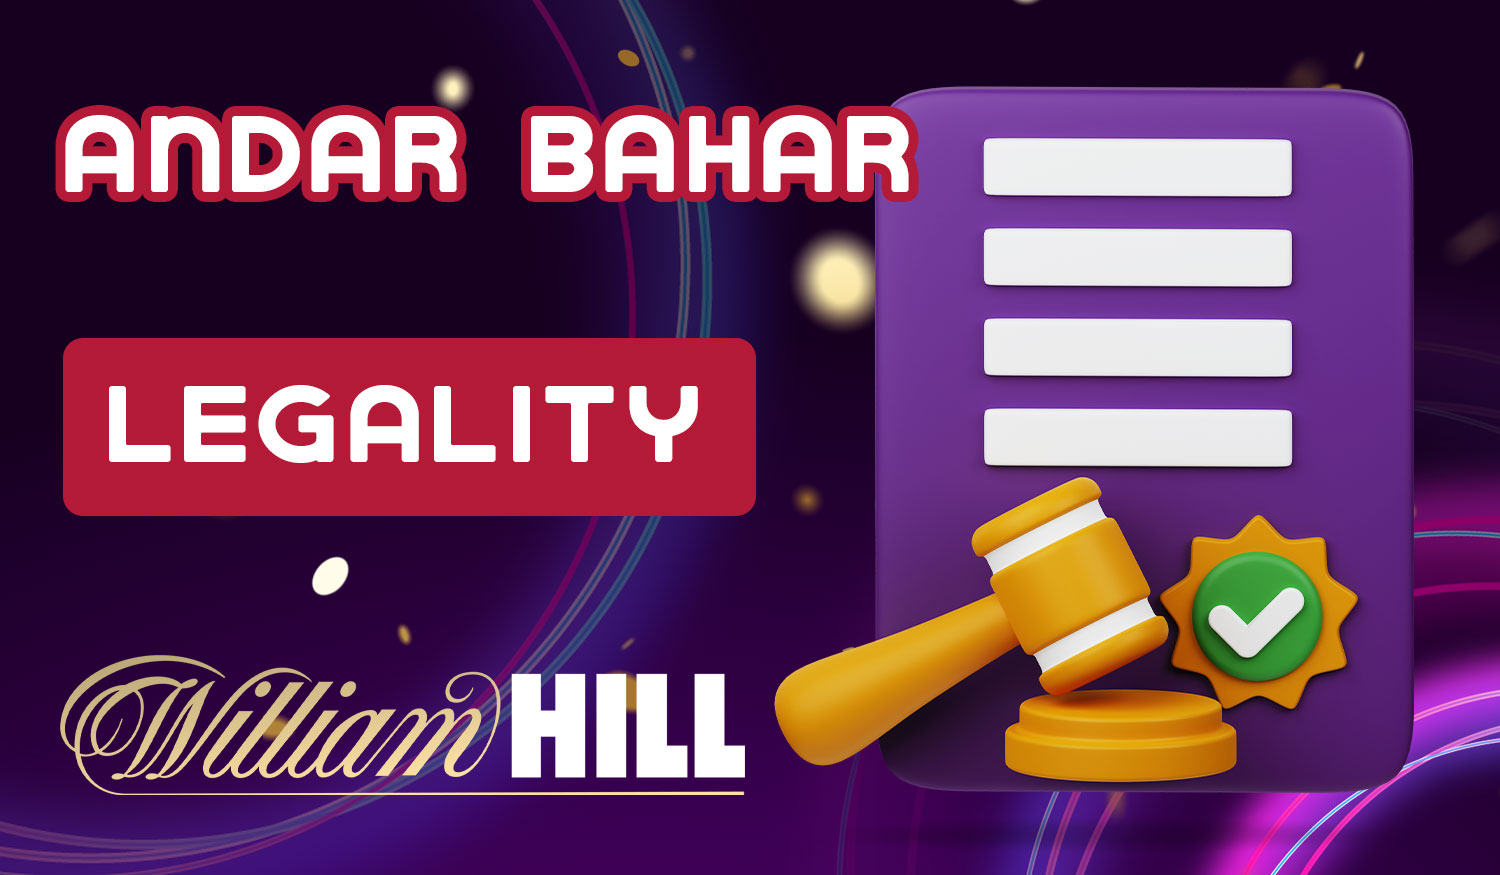 William Hill is fully legal in the territory of India